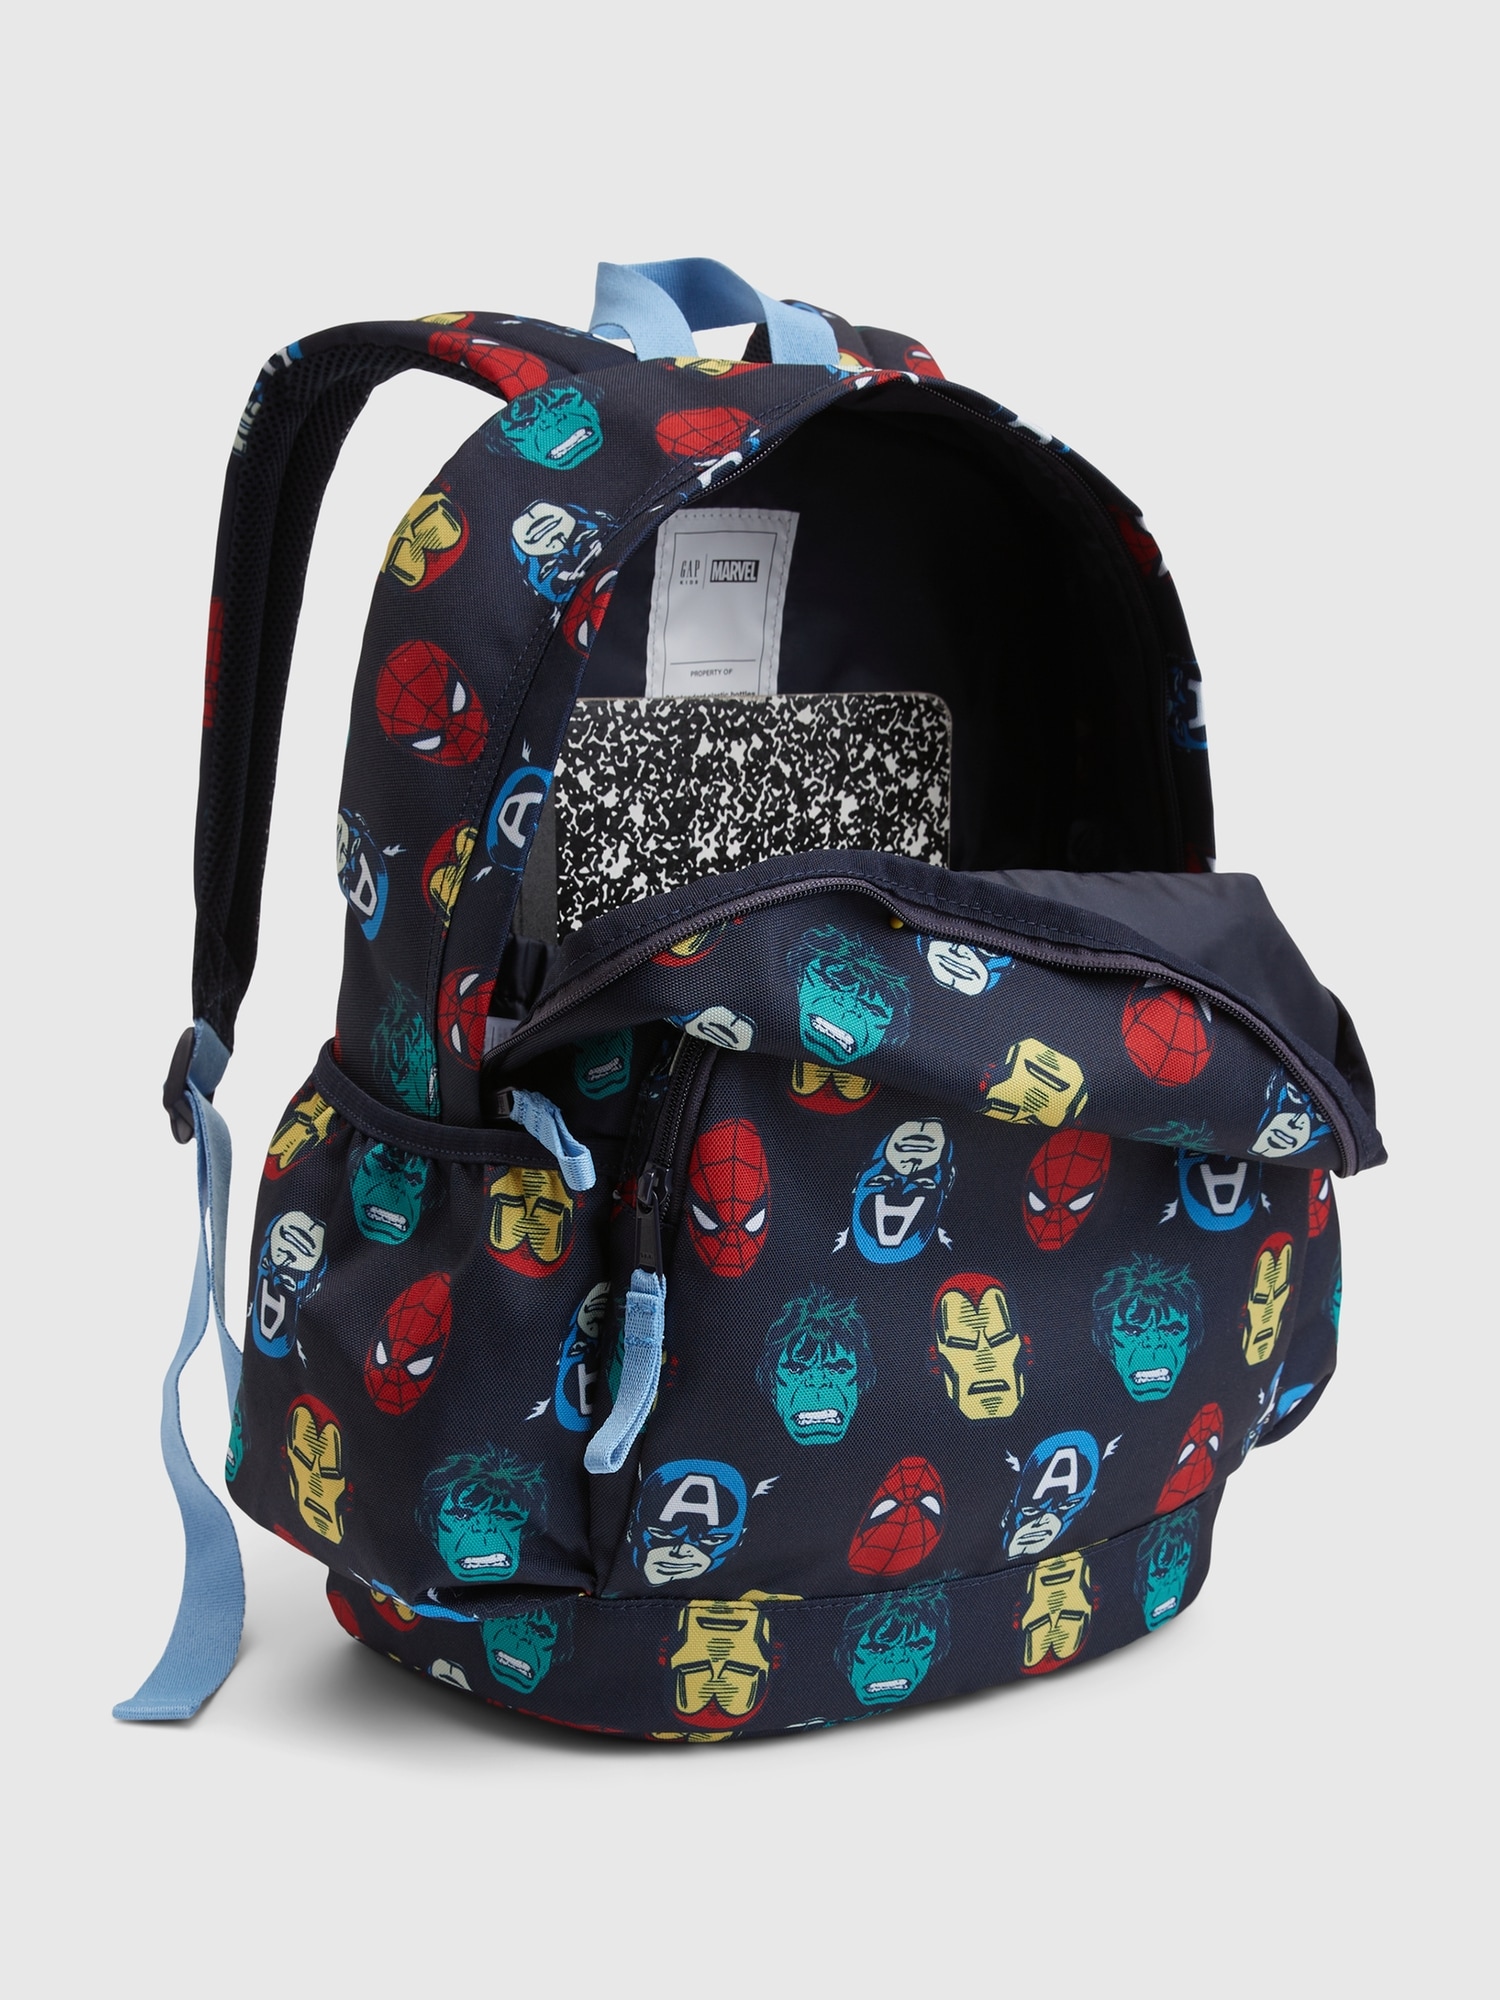 These Stunning Marvel Loungefly Backpacks & Wallets Are Perfect For Back To  School